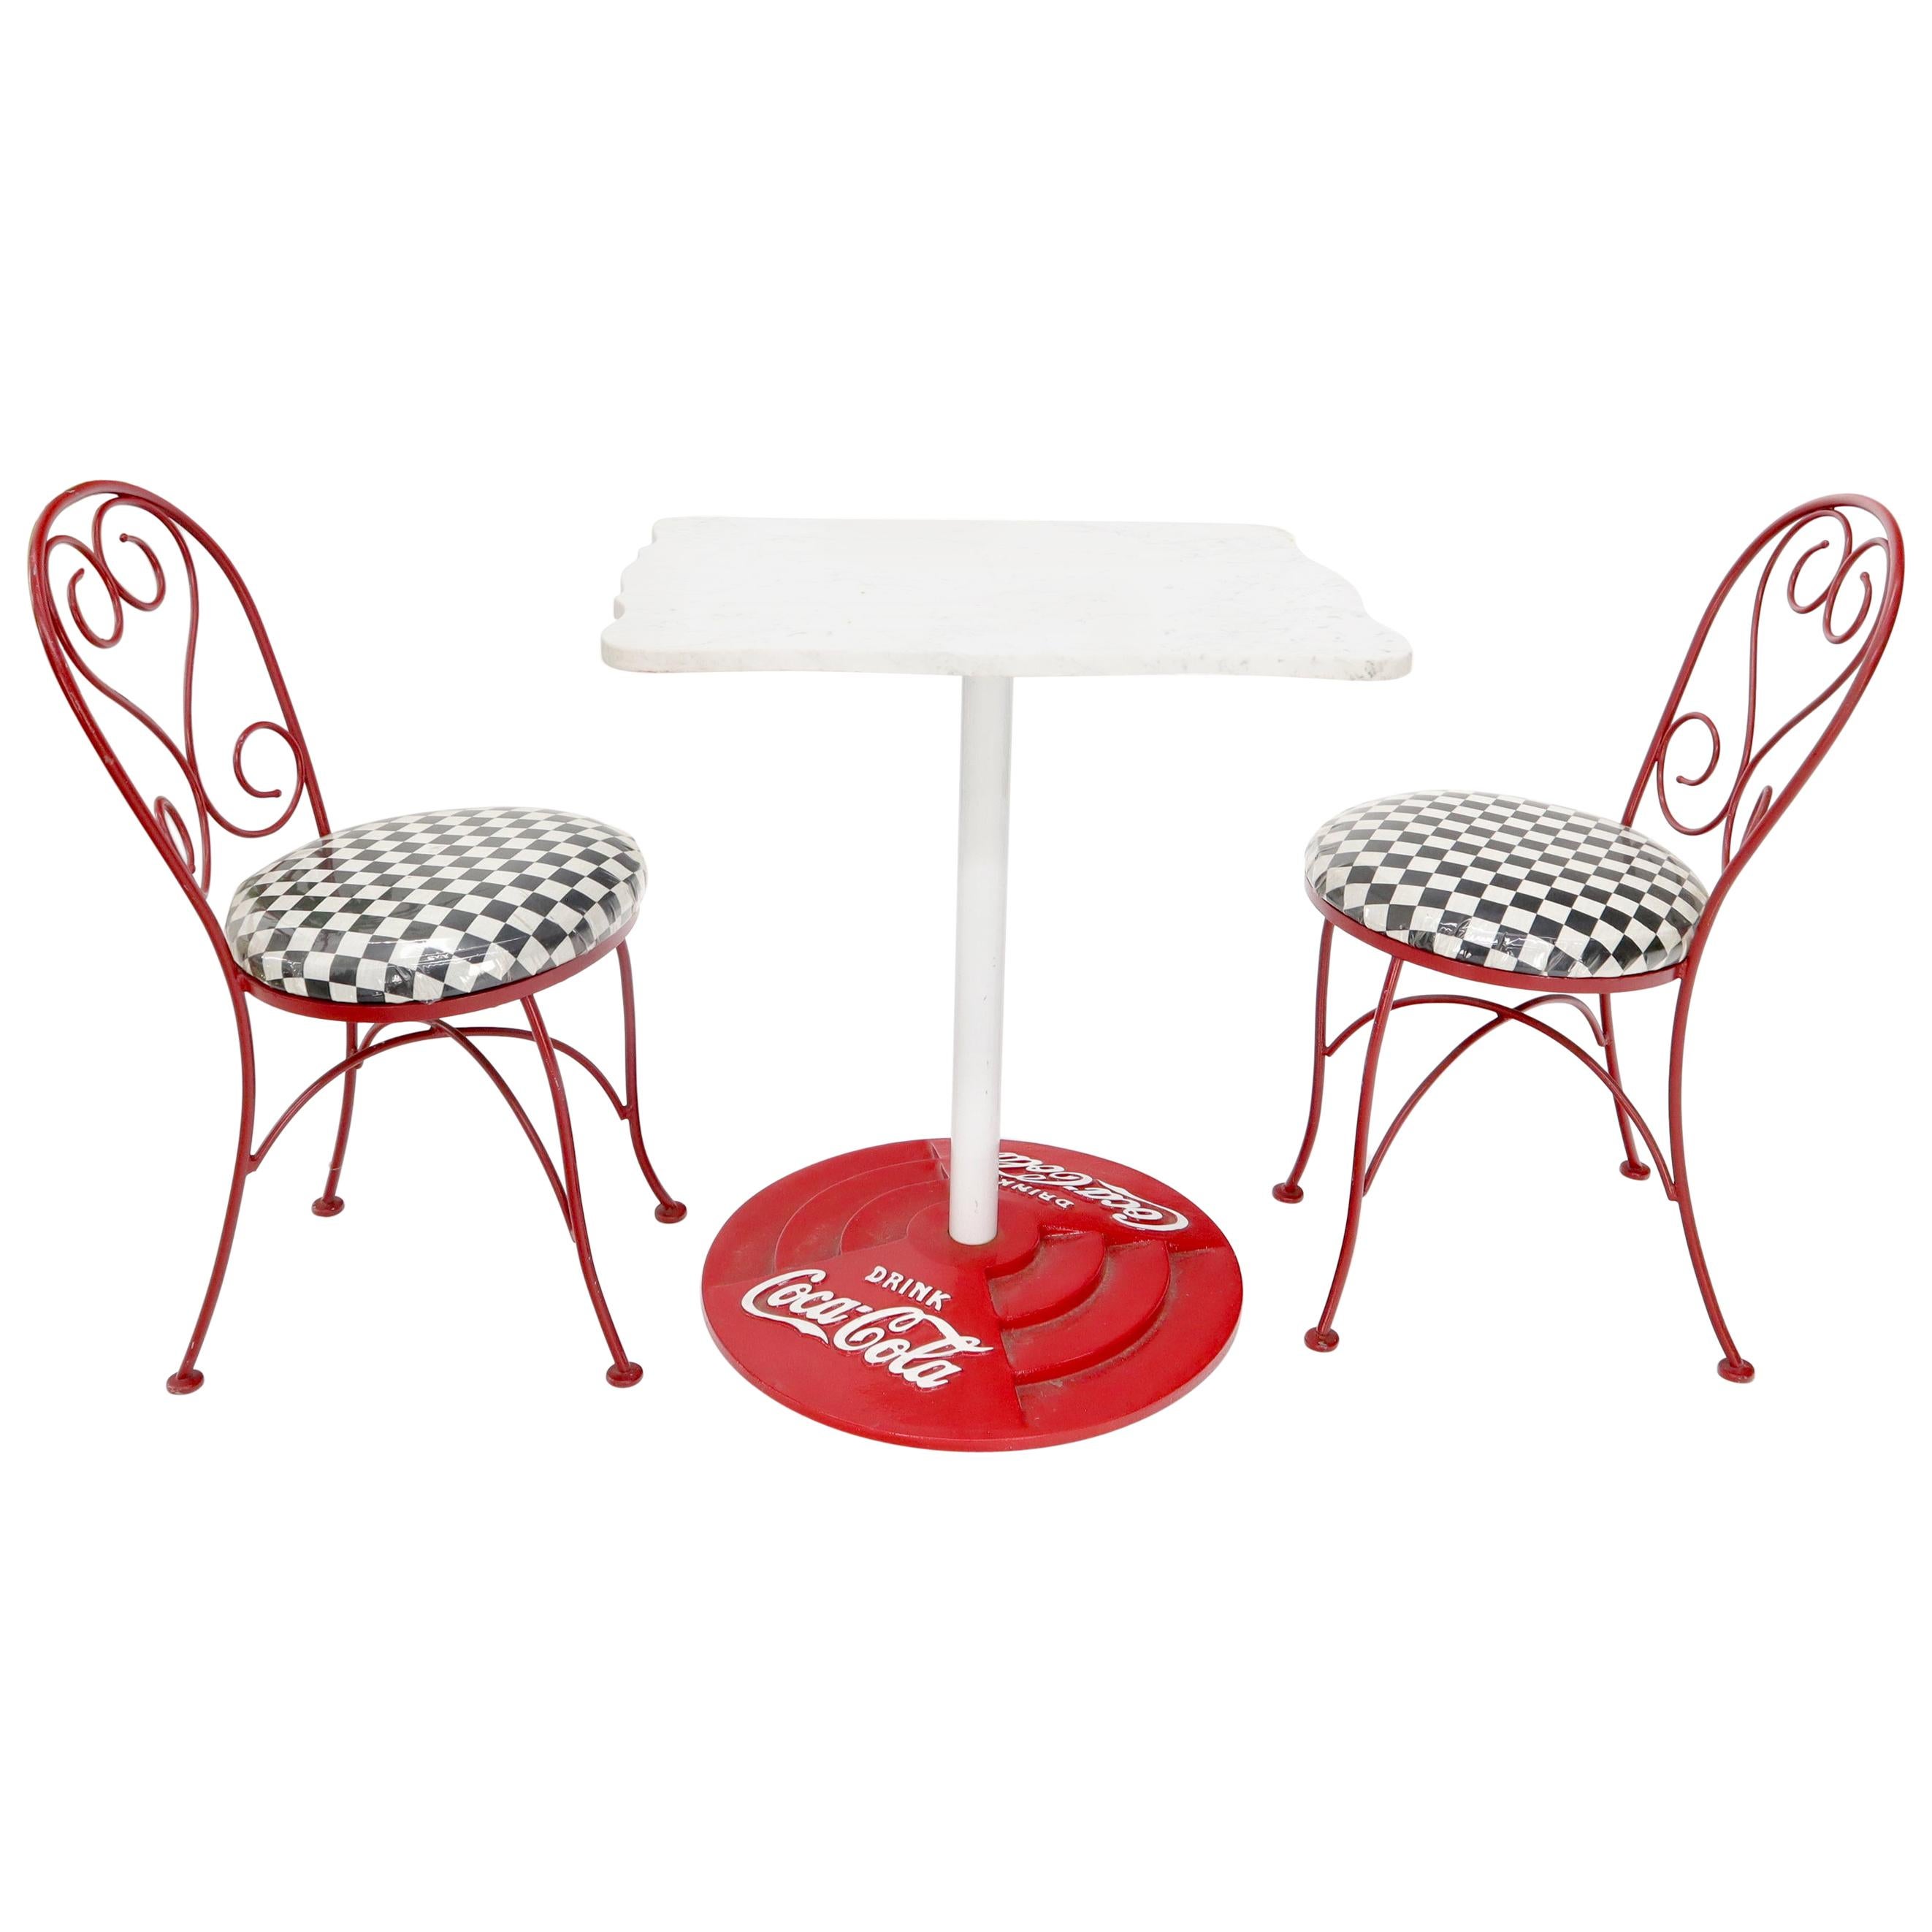 Two Chairs Cast Iron Marble-Top Table Coca-Cola Dinette Ice Cream Set Cafe Table